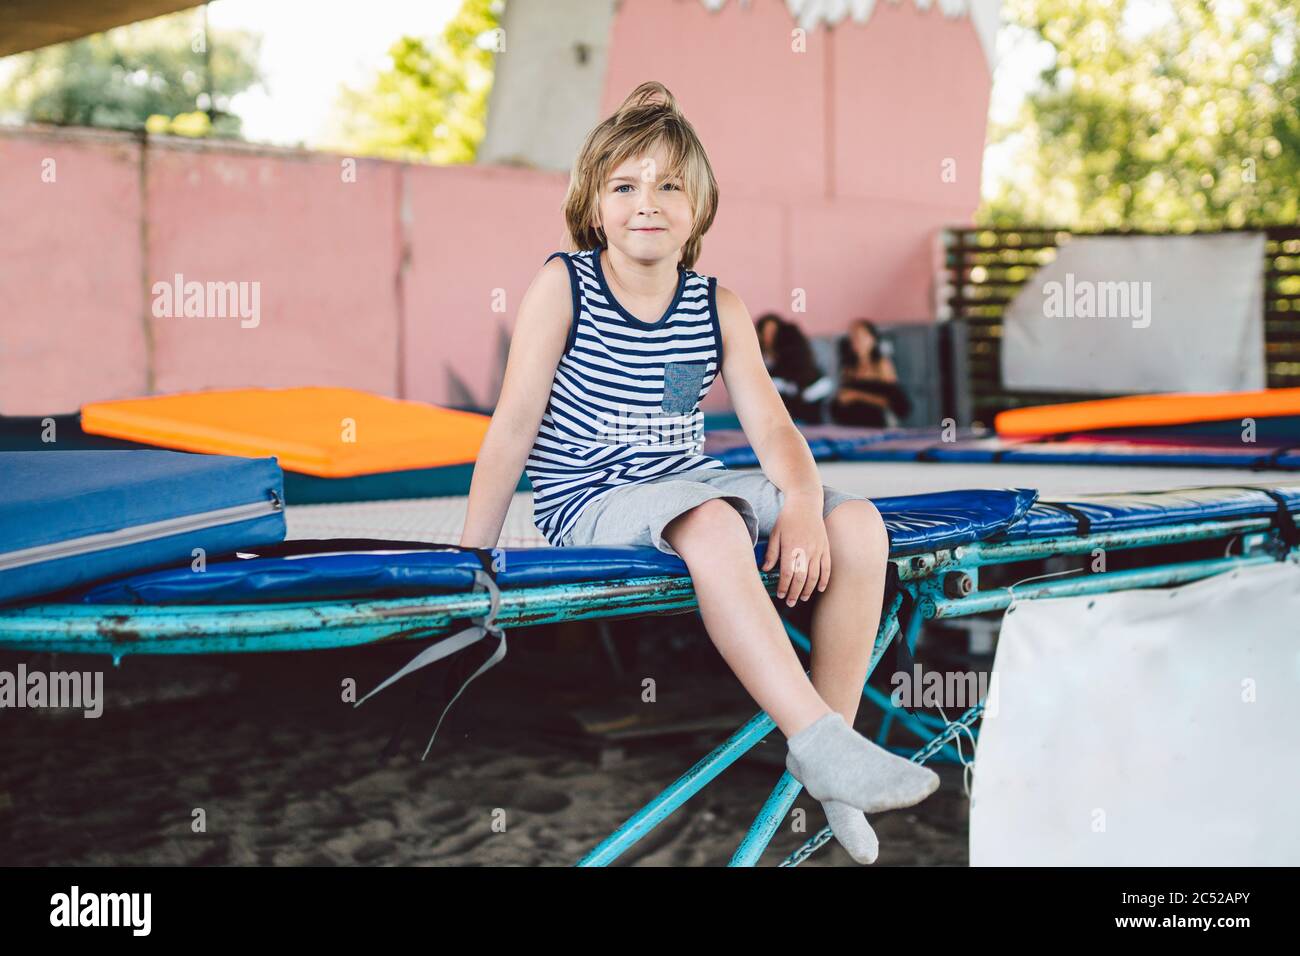 The theme of childhood, sports and health. Little boy gymnast resting in trampoline training session. A child athlete sits on a trampoline and looks Stock Photo